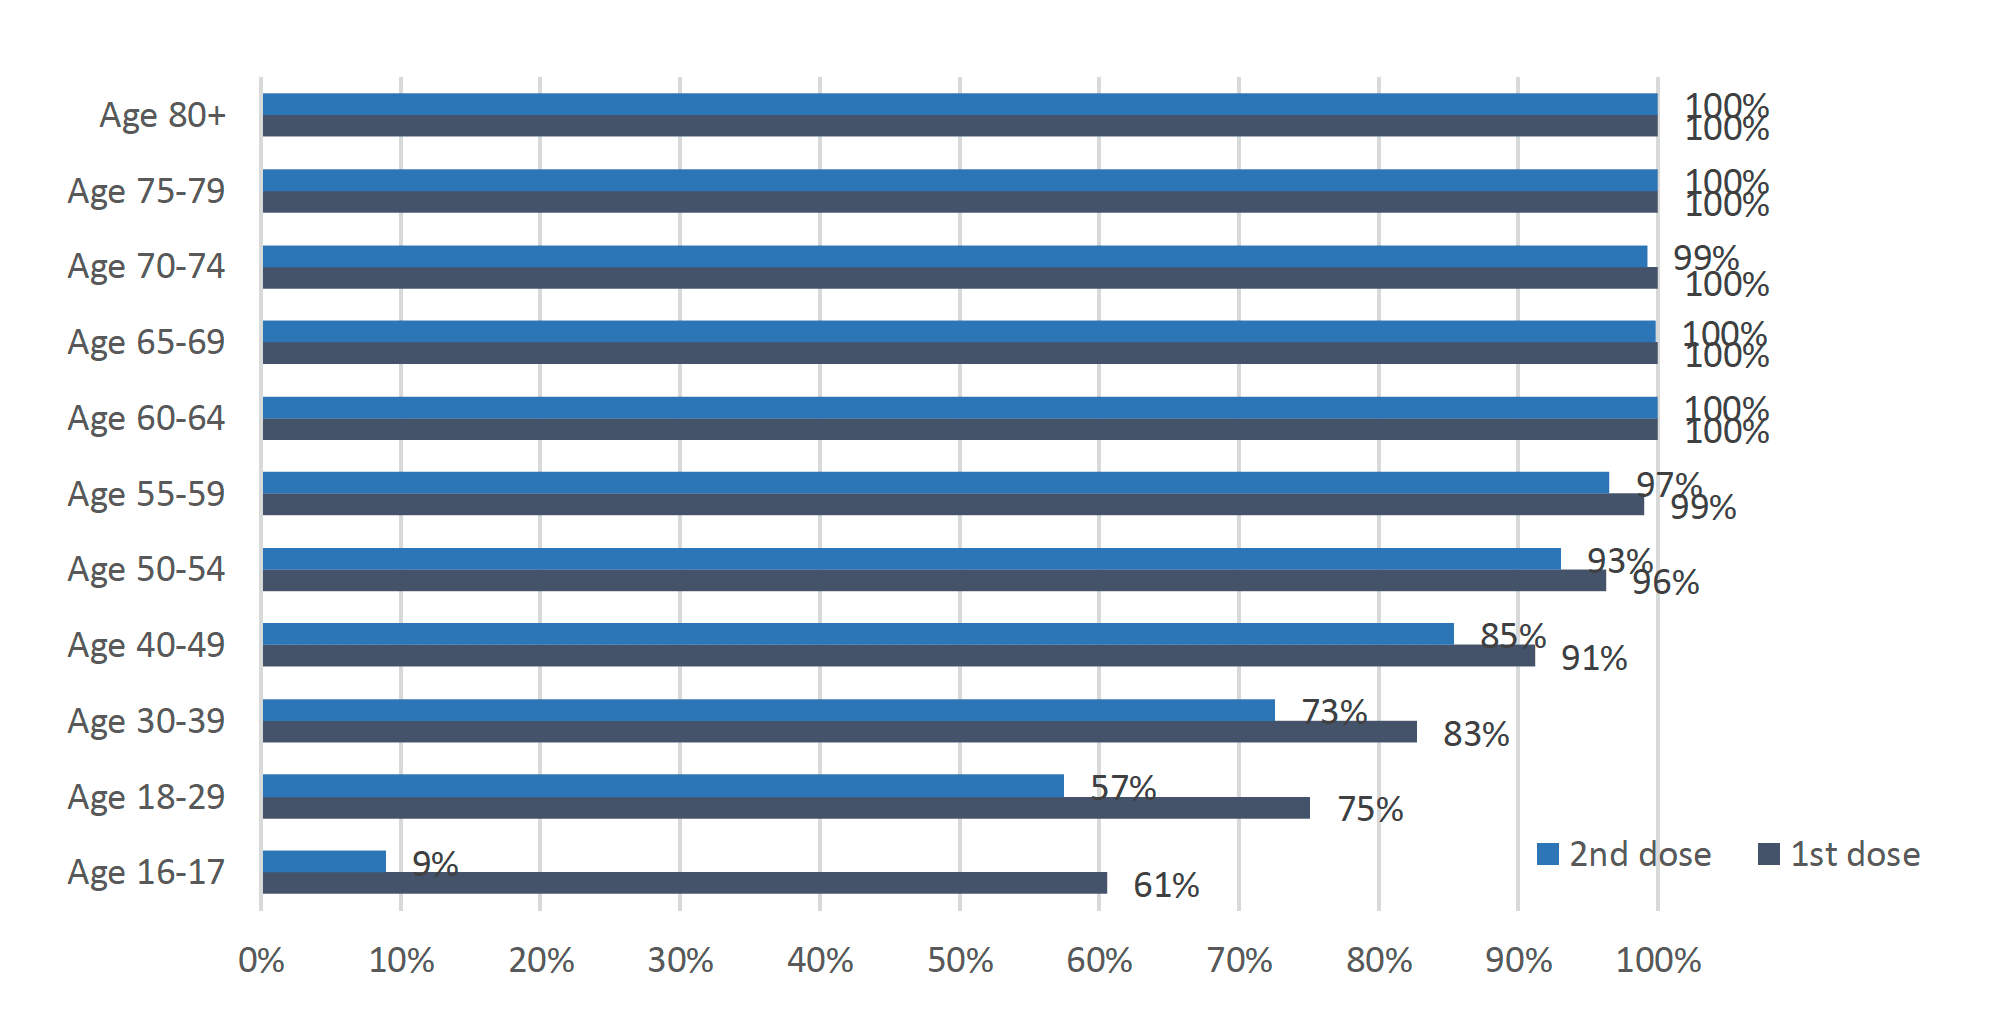 This bar chart shows the percentage of people that have received their first and second dose of the Covid vaccine so far, for 11 age groups. The six groups aged over 55 have more than 99% of people vaccinated with the first dose and more than 96% of people vaccinated with the second dose. Of those aged 50-54, 96% have received their first dose and 93% have received their second dose. Younger age groups have lower percentages vaccinated, with 91% of 40-49 year olds having received their first dose and 85% the second dose, 83% of the 30-39 year olds having received their first and 73% having received their second dose, 75% of 18 to 29 year olds having received the first dose and 57% having received the second dose, and 61% of the 16-17 year olds having received their first dose and only 9% their second dose of the vaccine.